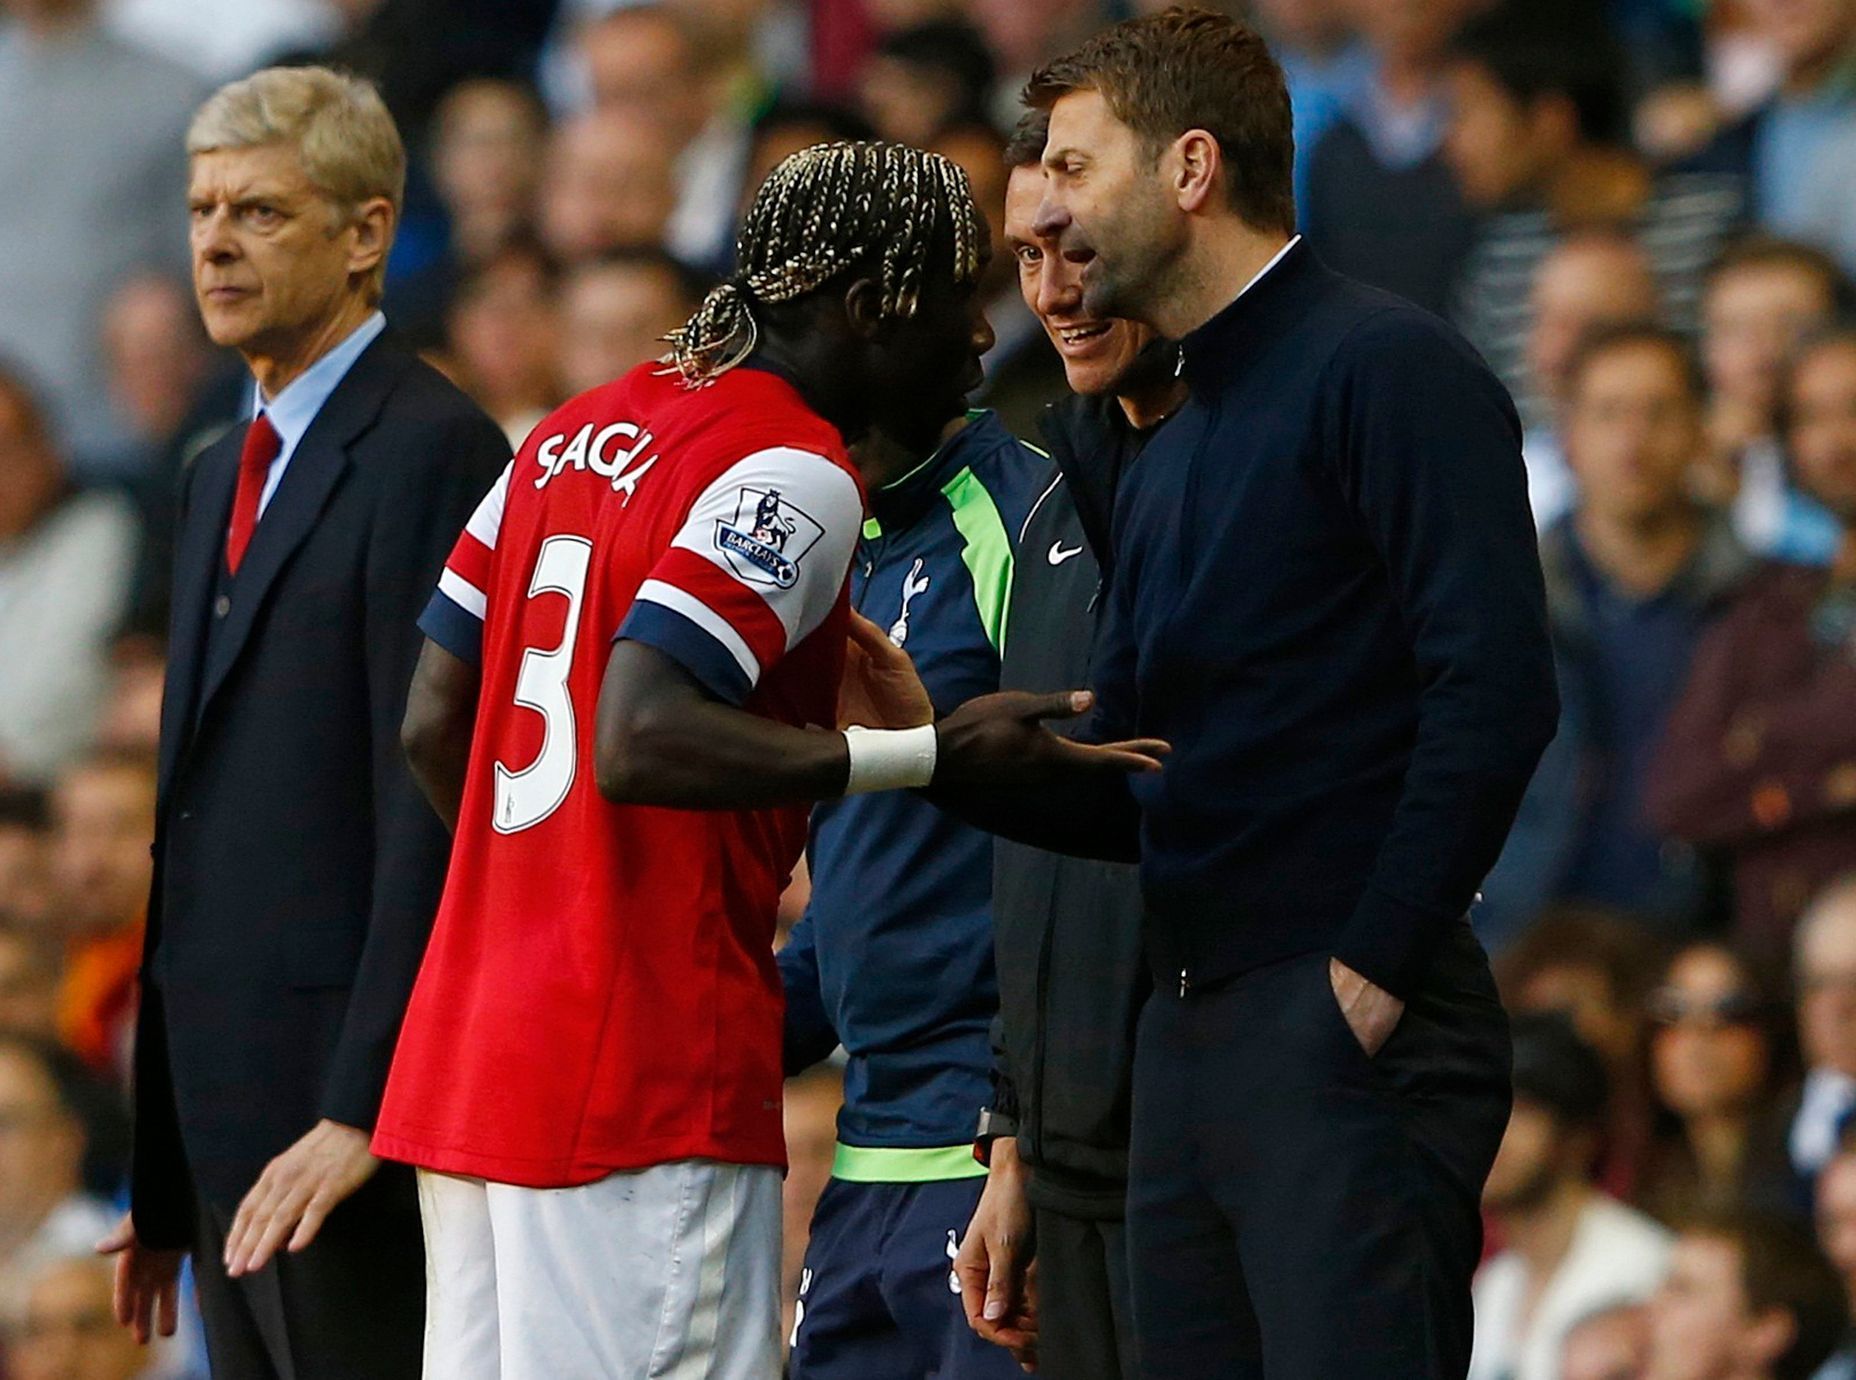 Arsenal's Sagna reacts after he was hit by a ball thrown by Tottenham Hotspur's manager Sherwood during their English Premier League soccer match in London